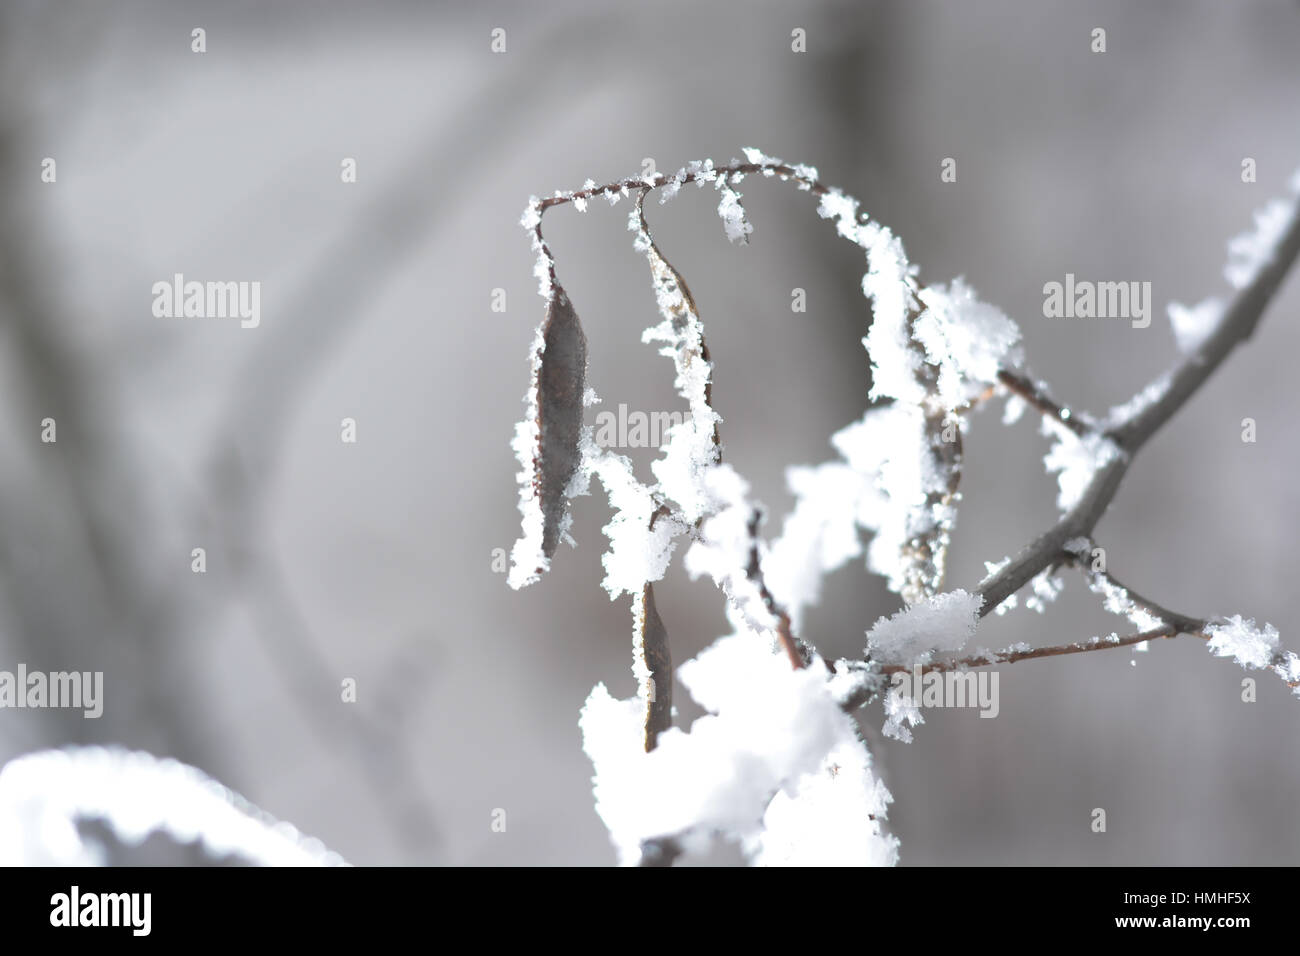 Frozen branch covered with snow with blurred background Stock Photo